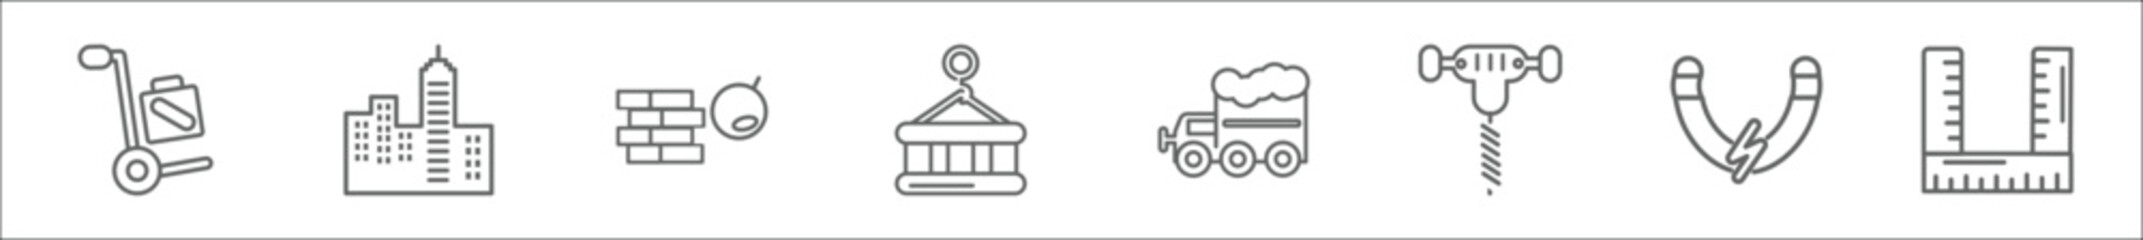 outline set of construction line icons. linear vector icons such as trolley with cargo, , demolition, derrick with pallet, little snowplow, pickaxes drilling, inclined magnet, angle ruler